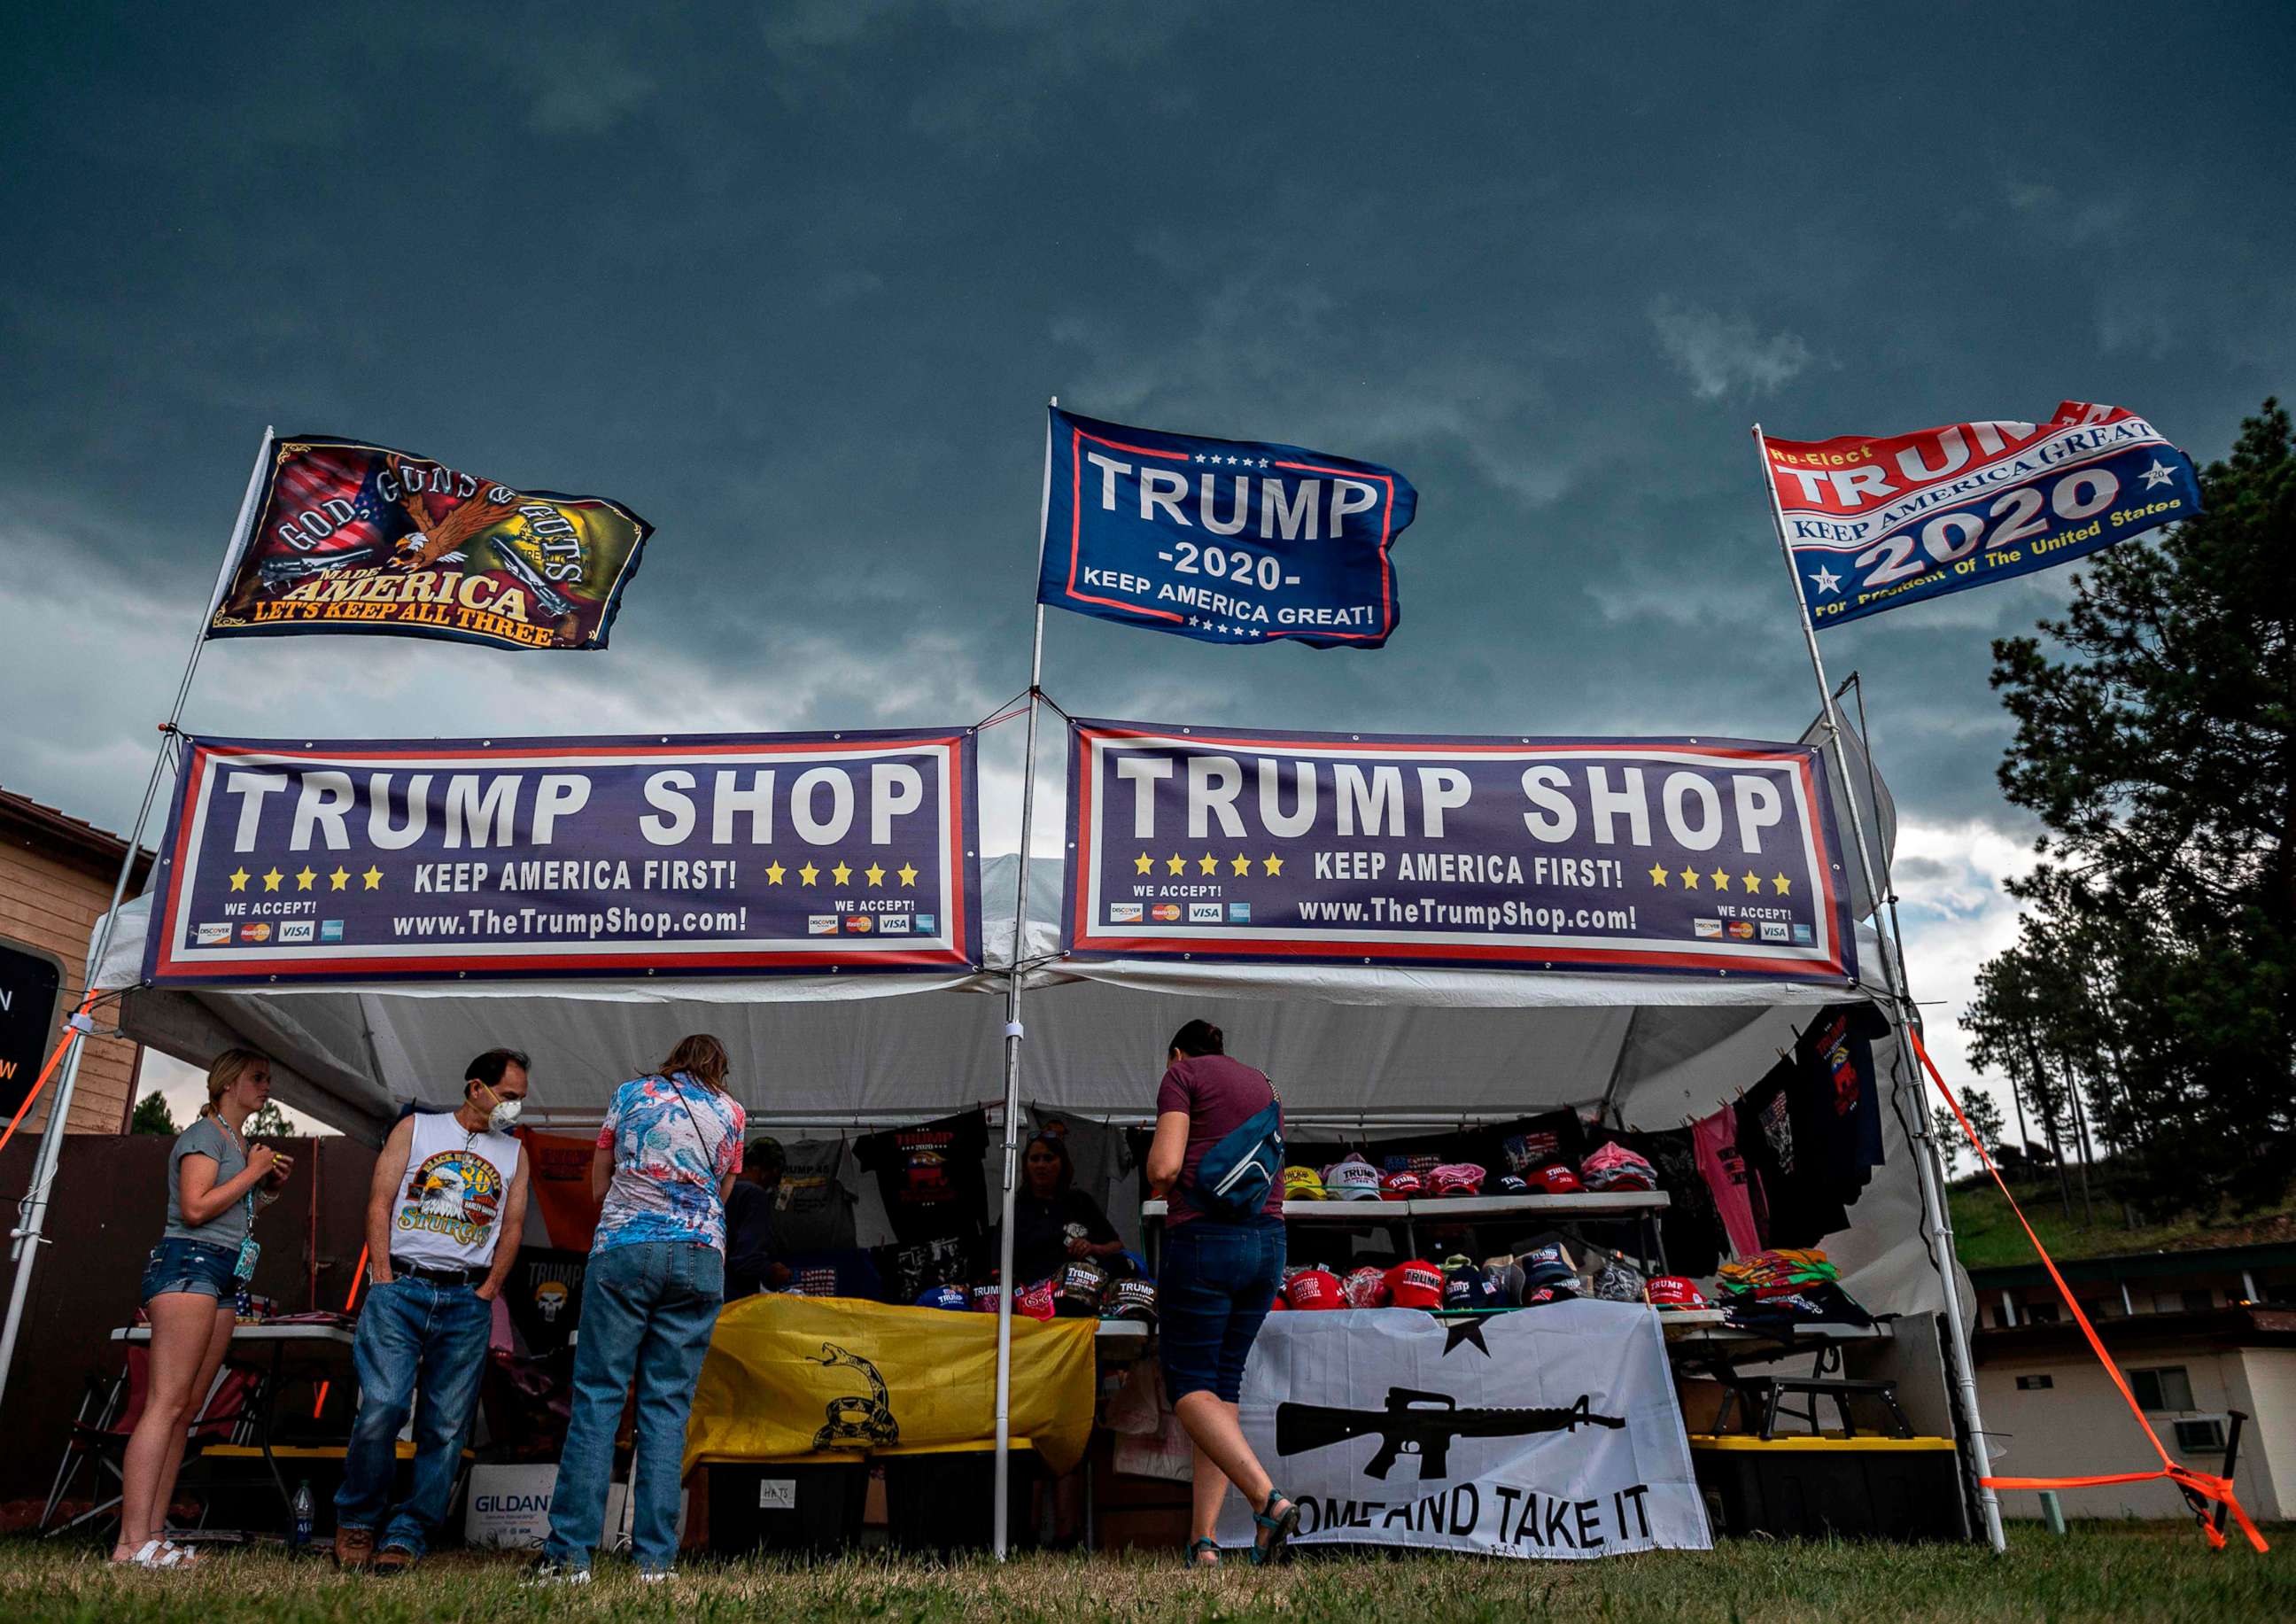 PHOTO: Tourists browse a gift store featuring President Donald Trump campaign items in Keystone, South Dakota, July 2, 2020, ahead of the president's visit to Mount Rushmore.